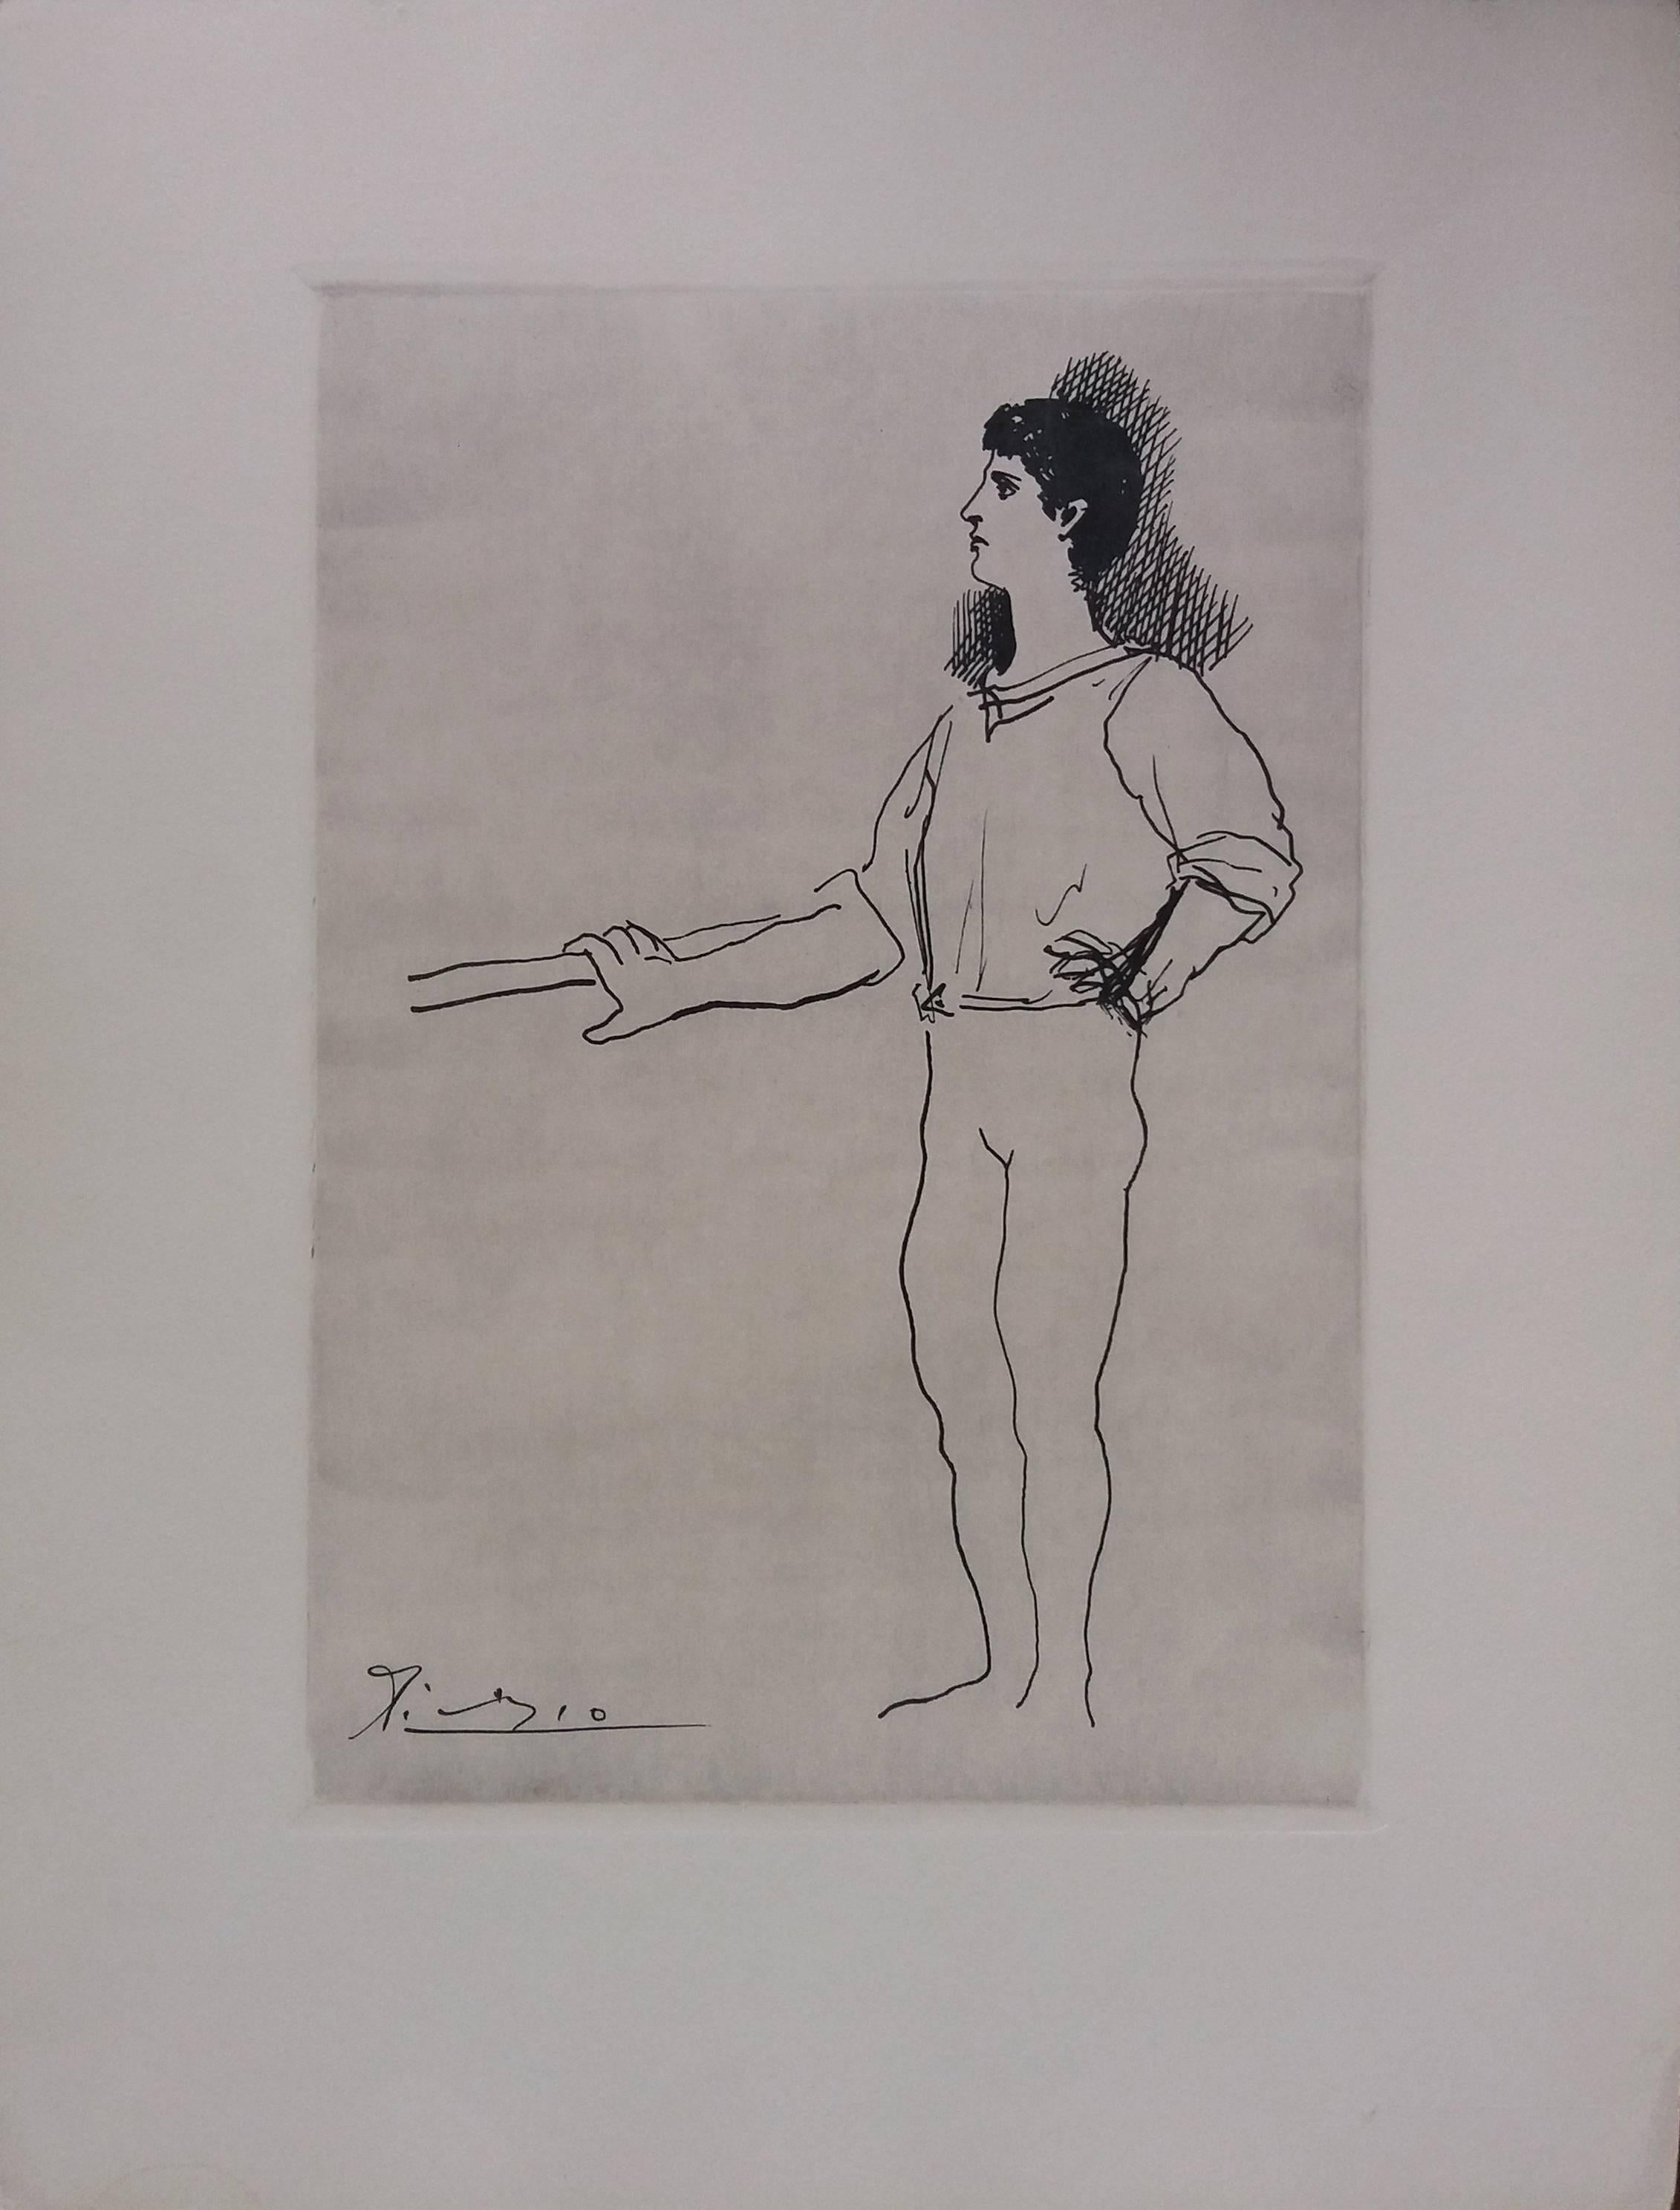 (after) Pablo Picasso Figurative Print - Pablo Picasso original drawing engraved on copper 2/8 (1943)